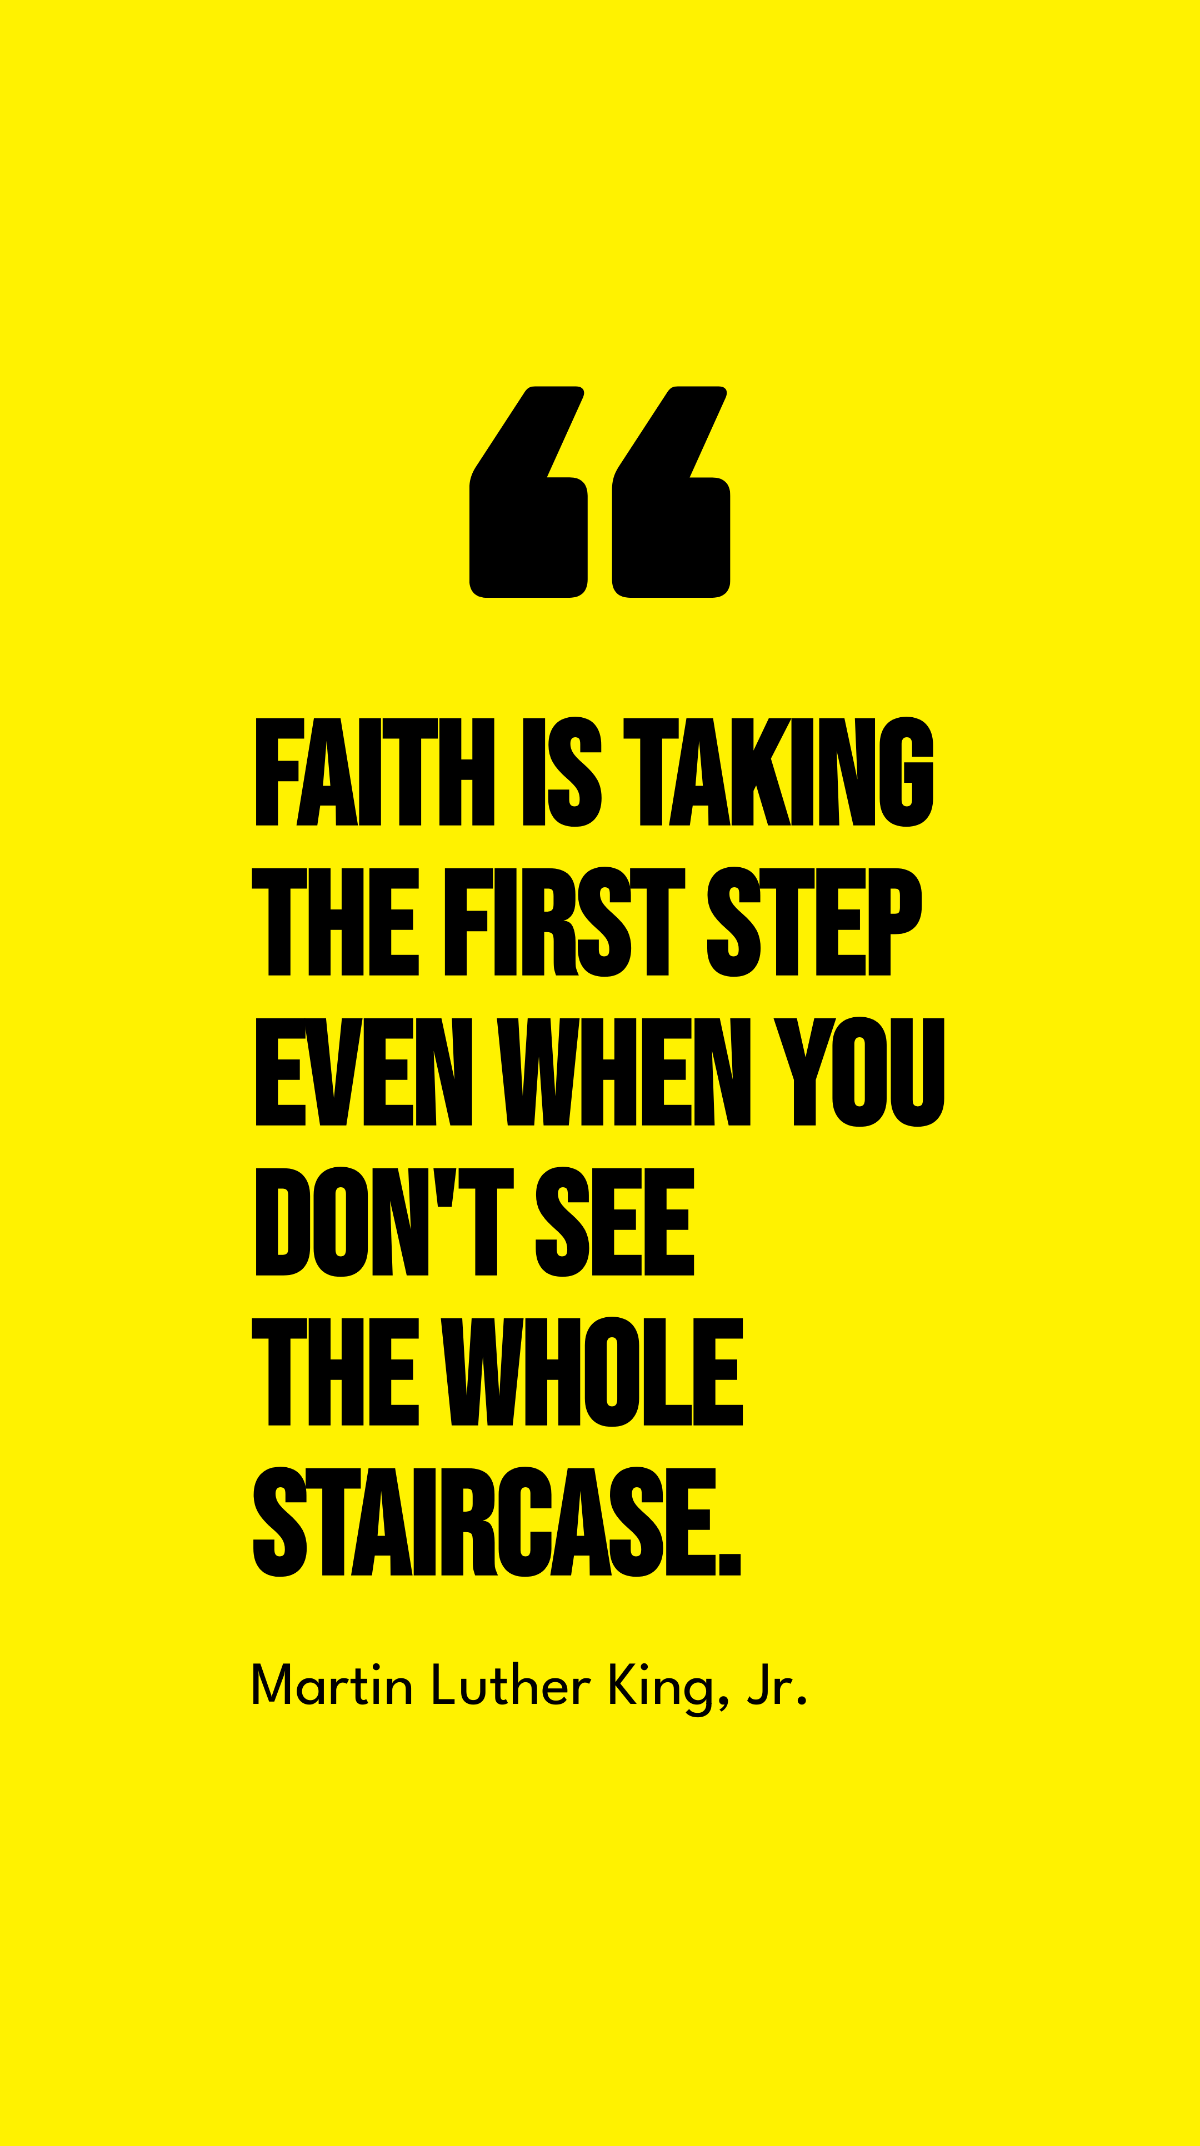 Martin Luther King, Jr. - Faith is taking the first step even when you don't see the whole staircase.